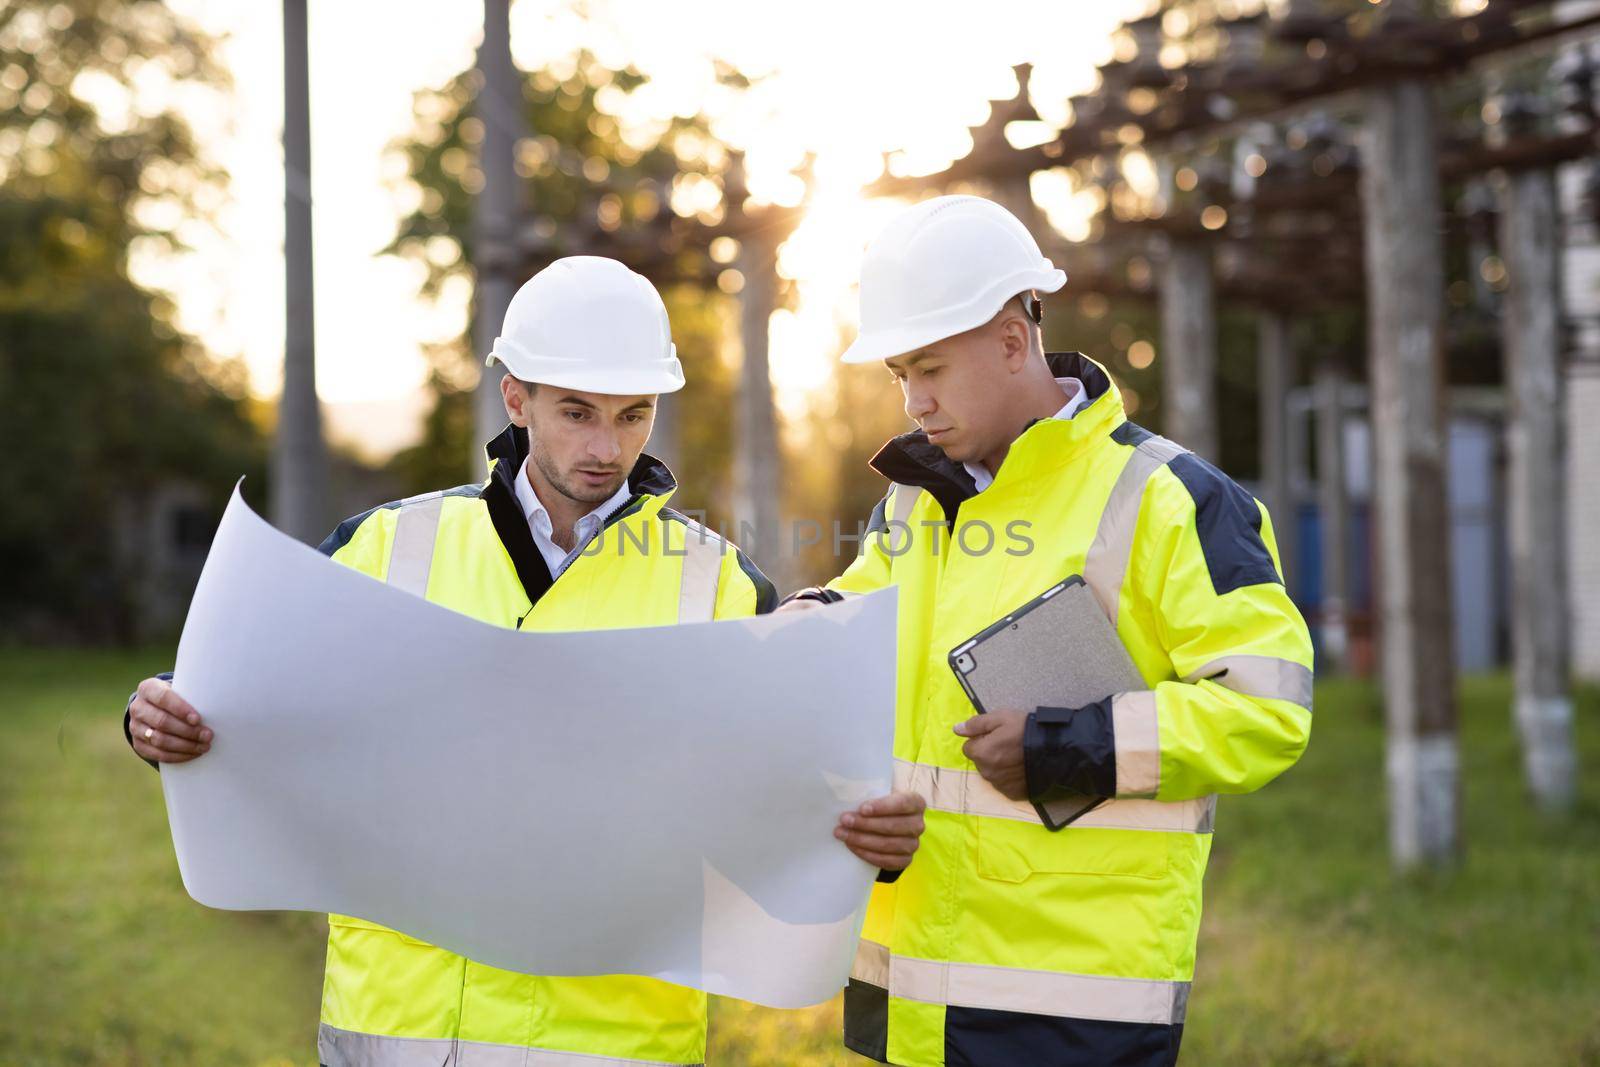 Group of Industry Engineer discussion with Blueprints checking information and safety system at Industrial Manufacturing Factory. Two worker talking with paper work at sunset. by uflypro